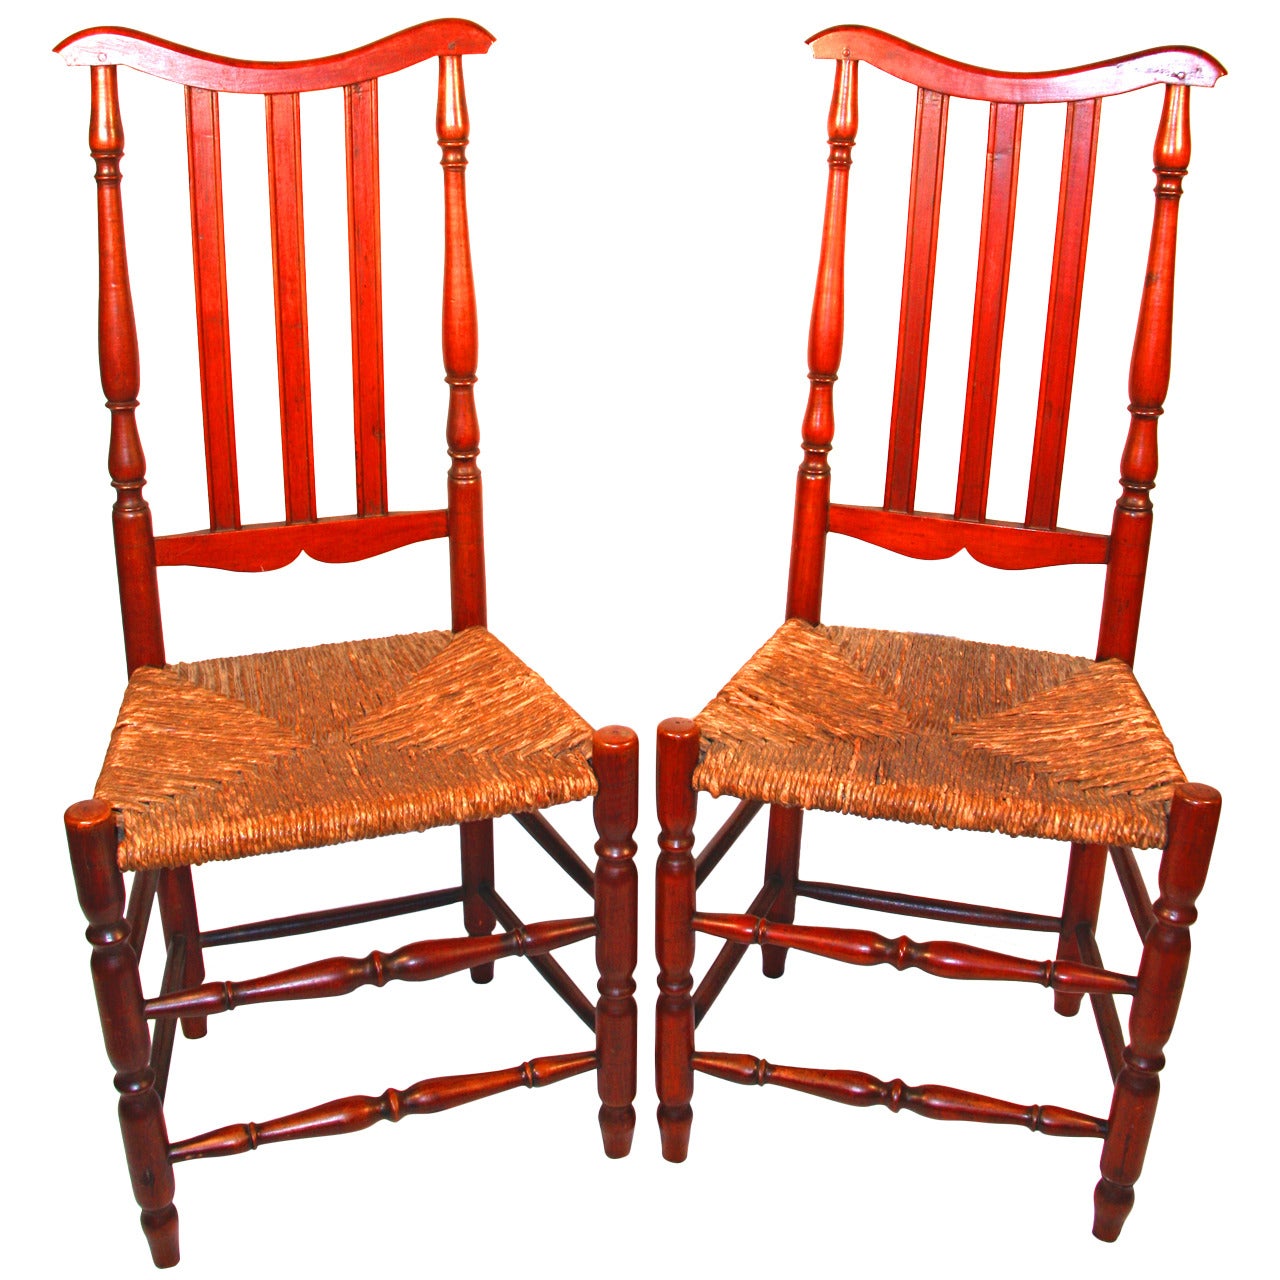 Pair of 18th Century Banister Back Chairs